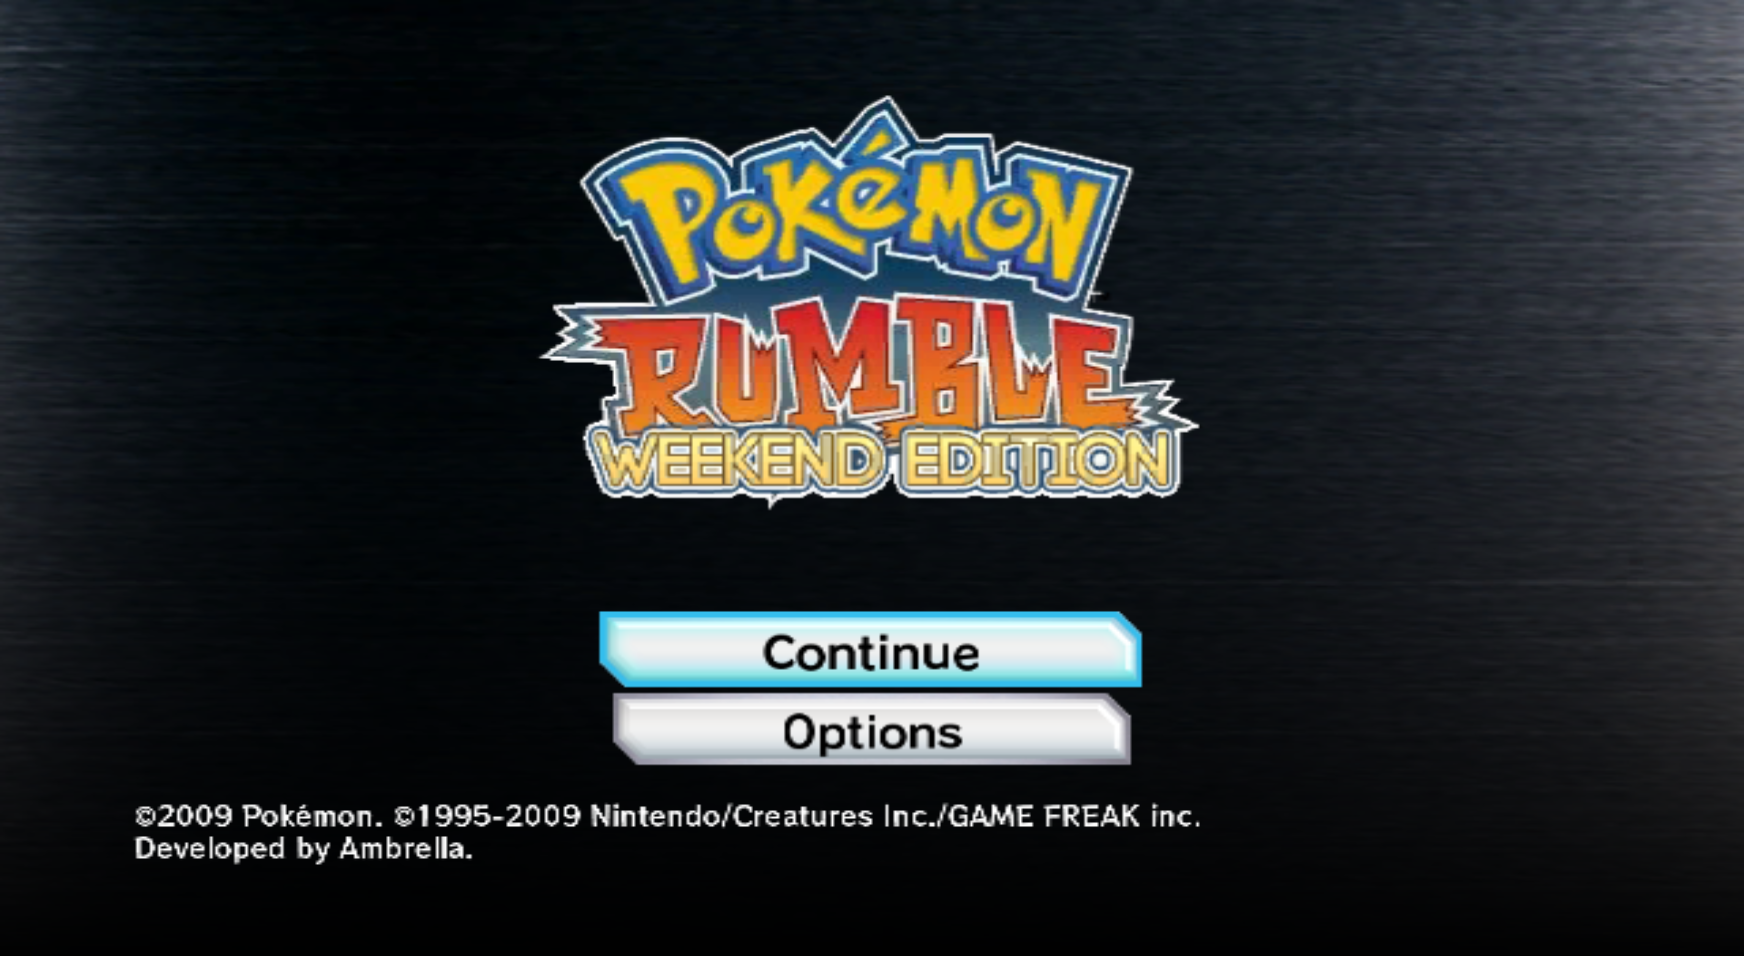 More information about "Pokemon Rumble: Weekend Edition"